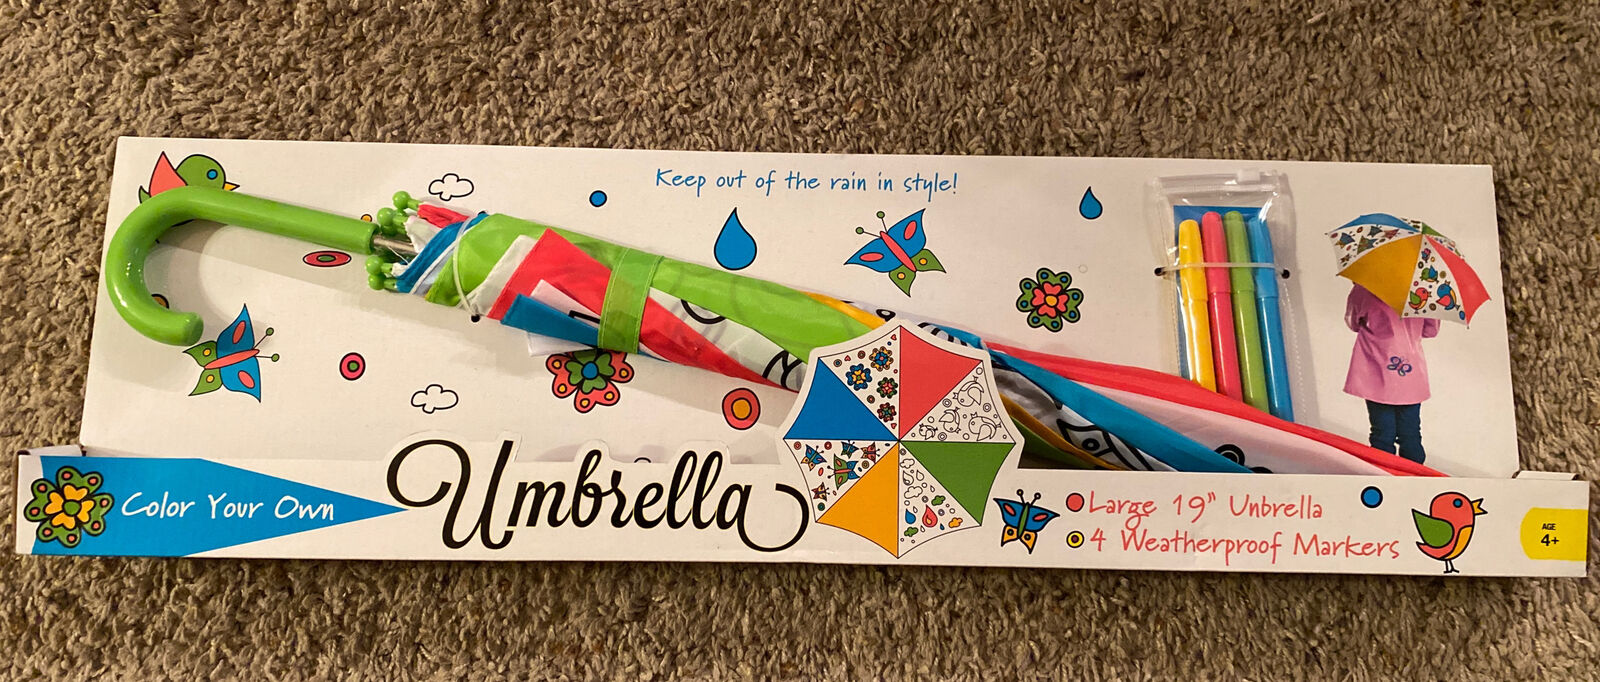 Brand New Color Your Own Kids Umbrella W/ Weatherproof Markers - 19”